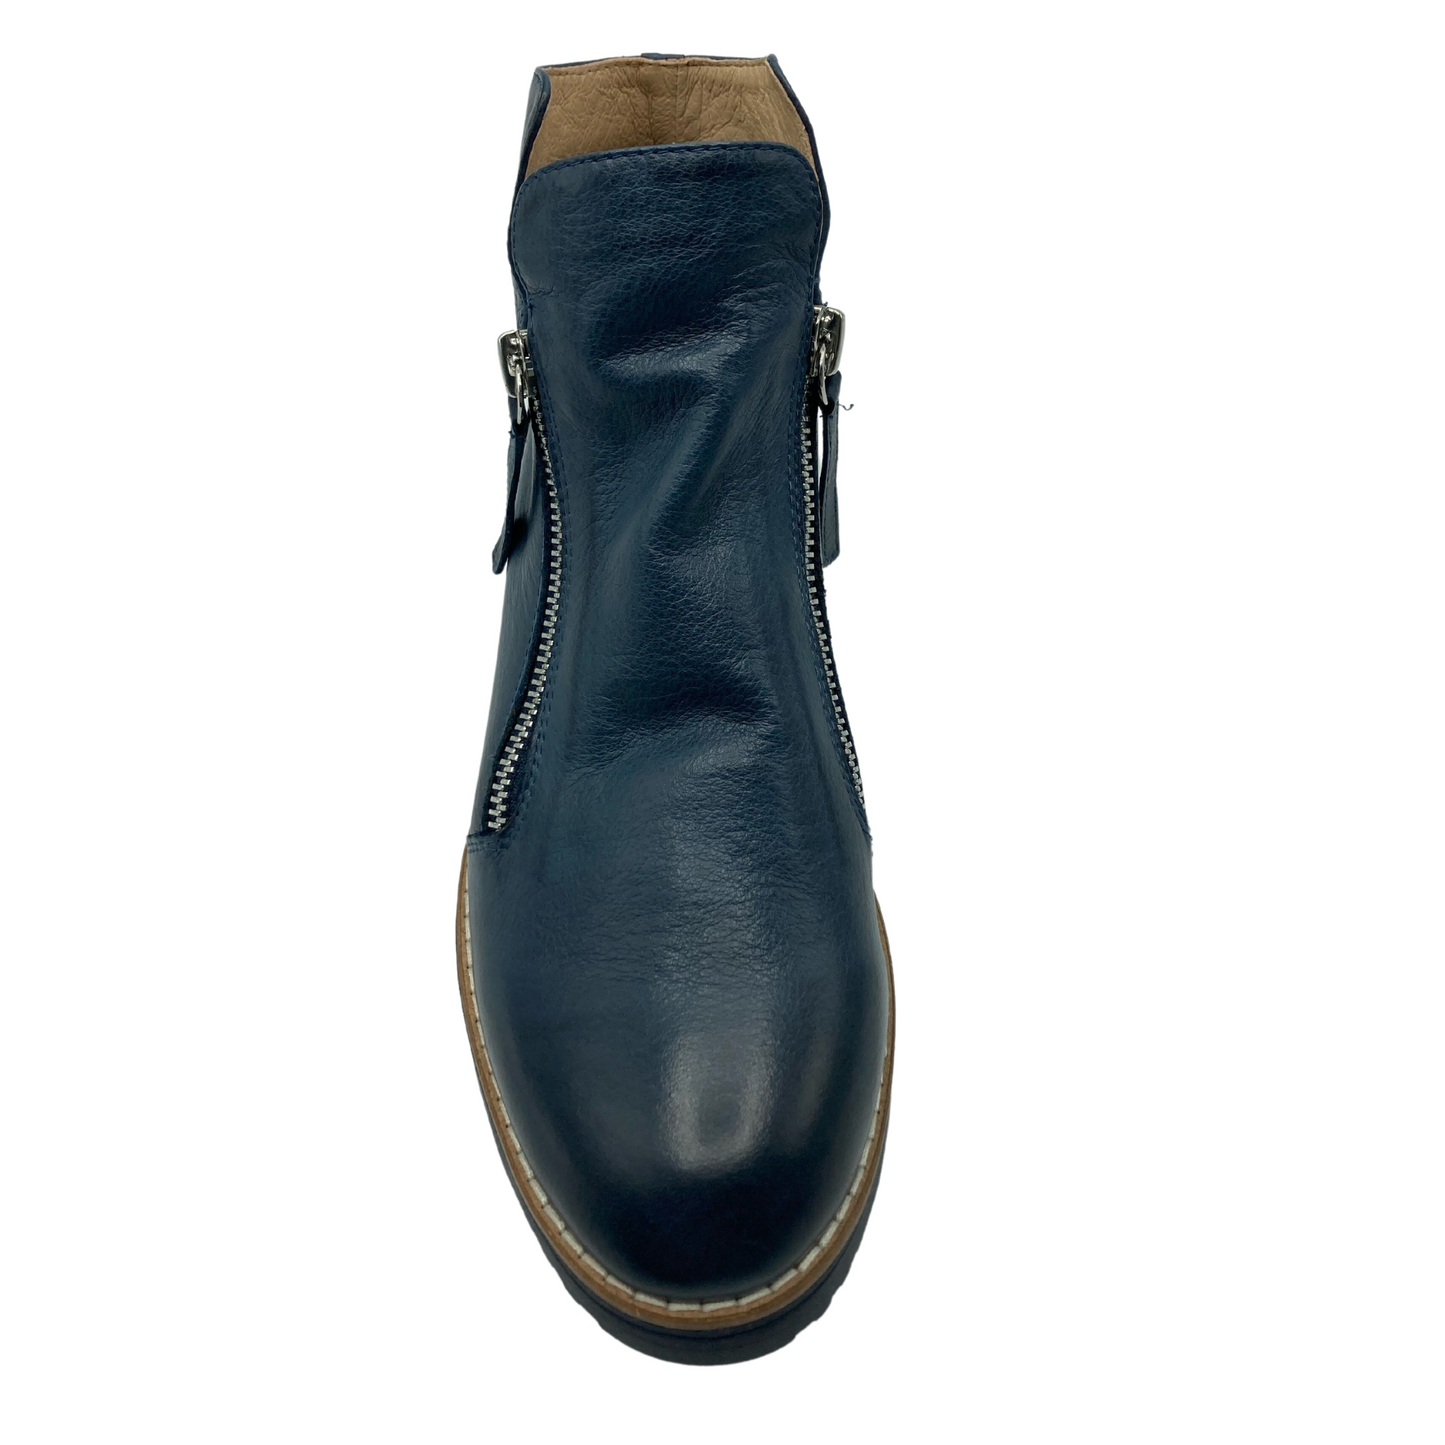 Top view of blue leather boot with rounded toe and a zipper on either side of the ankle